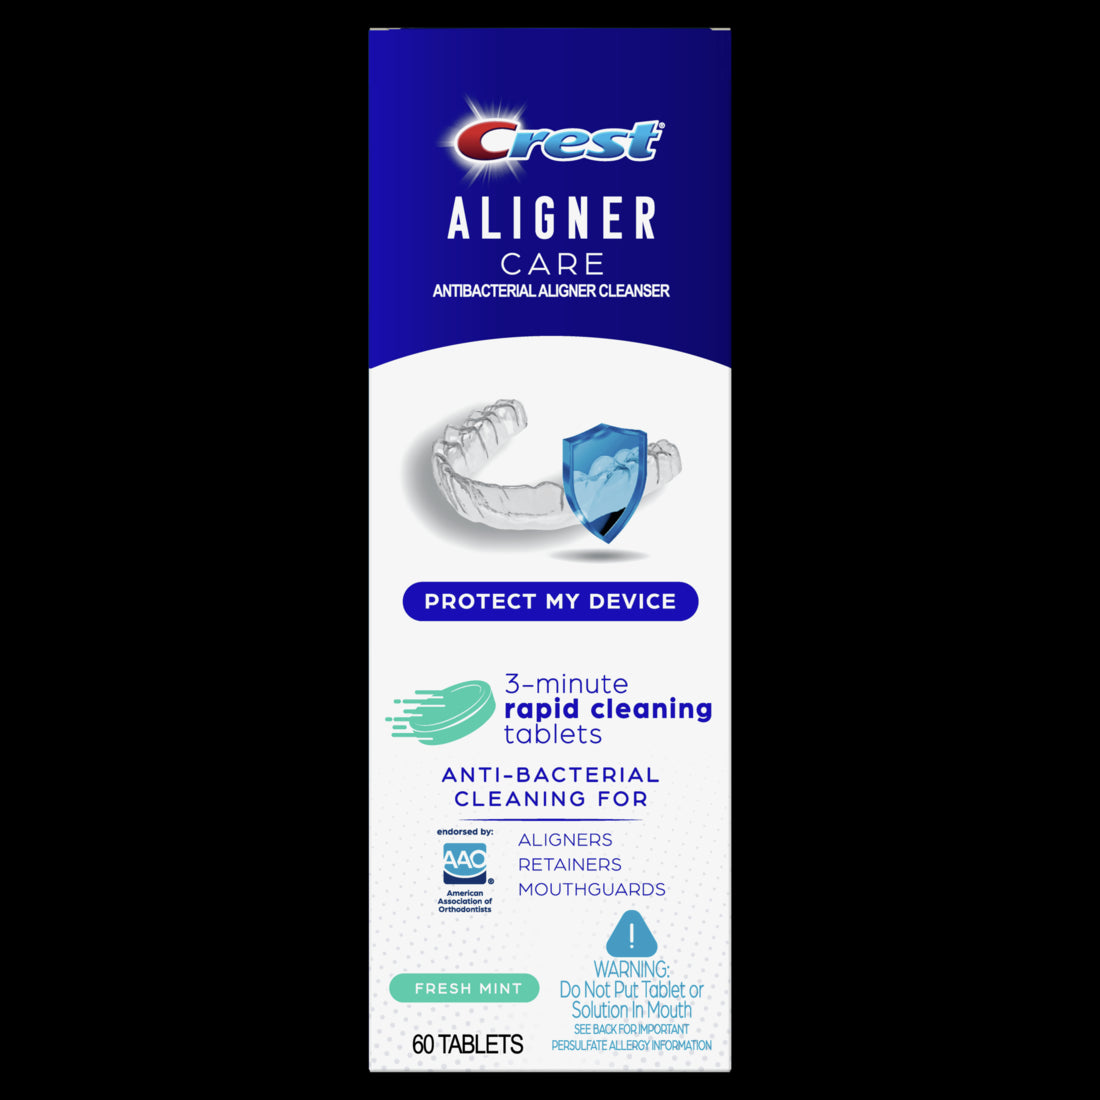 Crest Aligner Care Rapid Cleaning Tablets for Aligners Retainers Mouthguards - 60ct/24pk